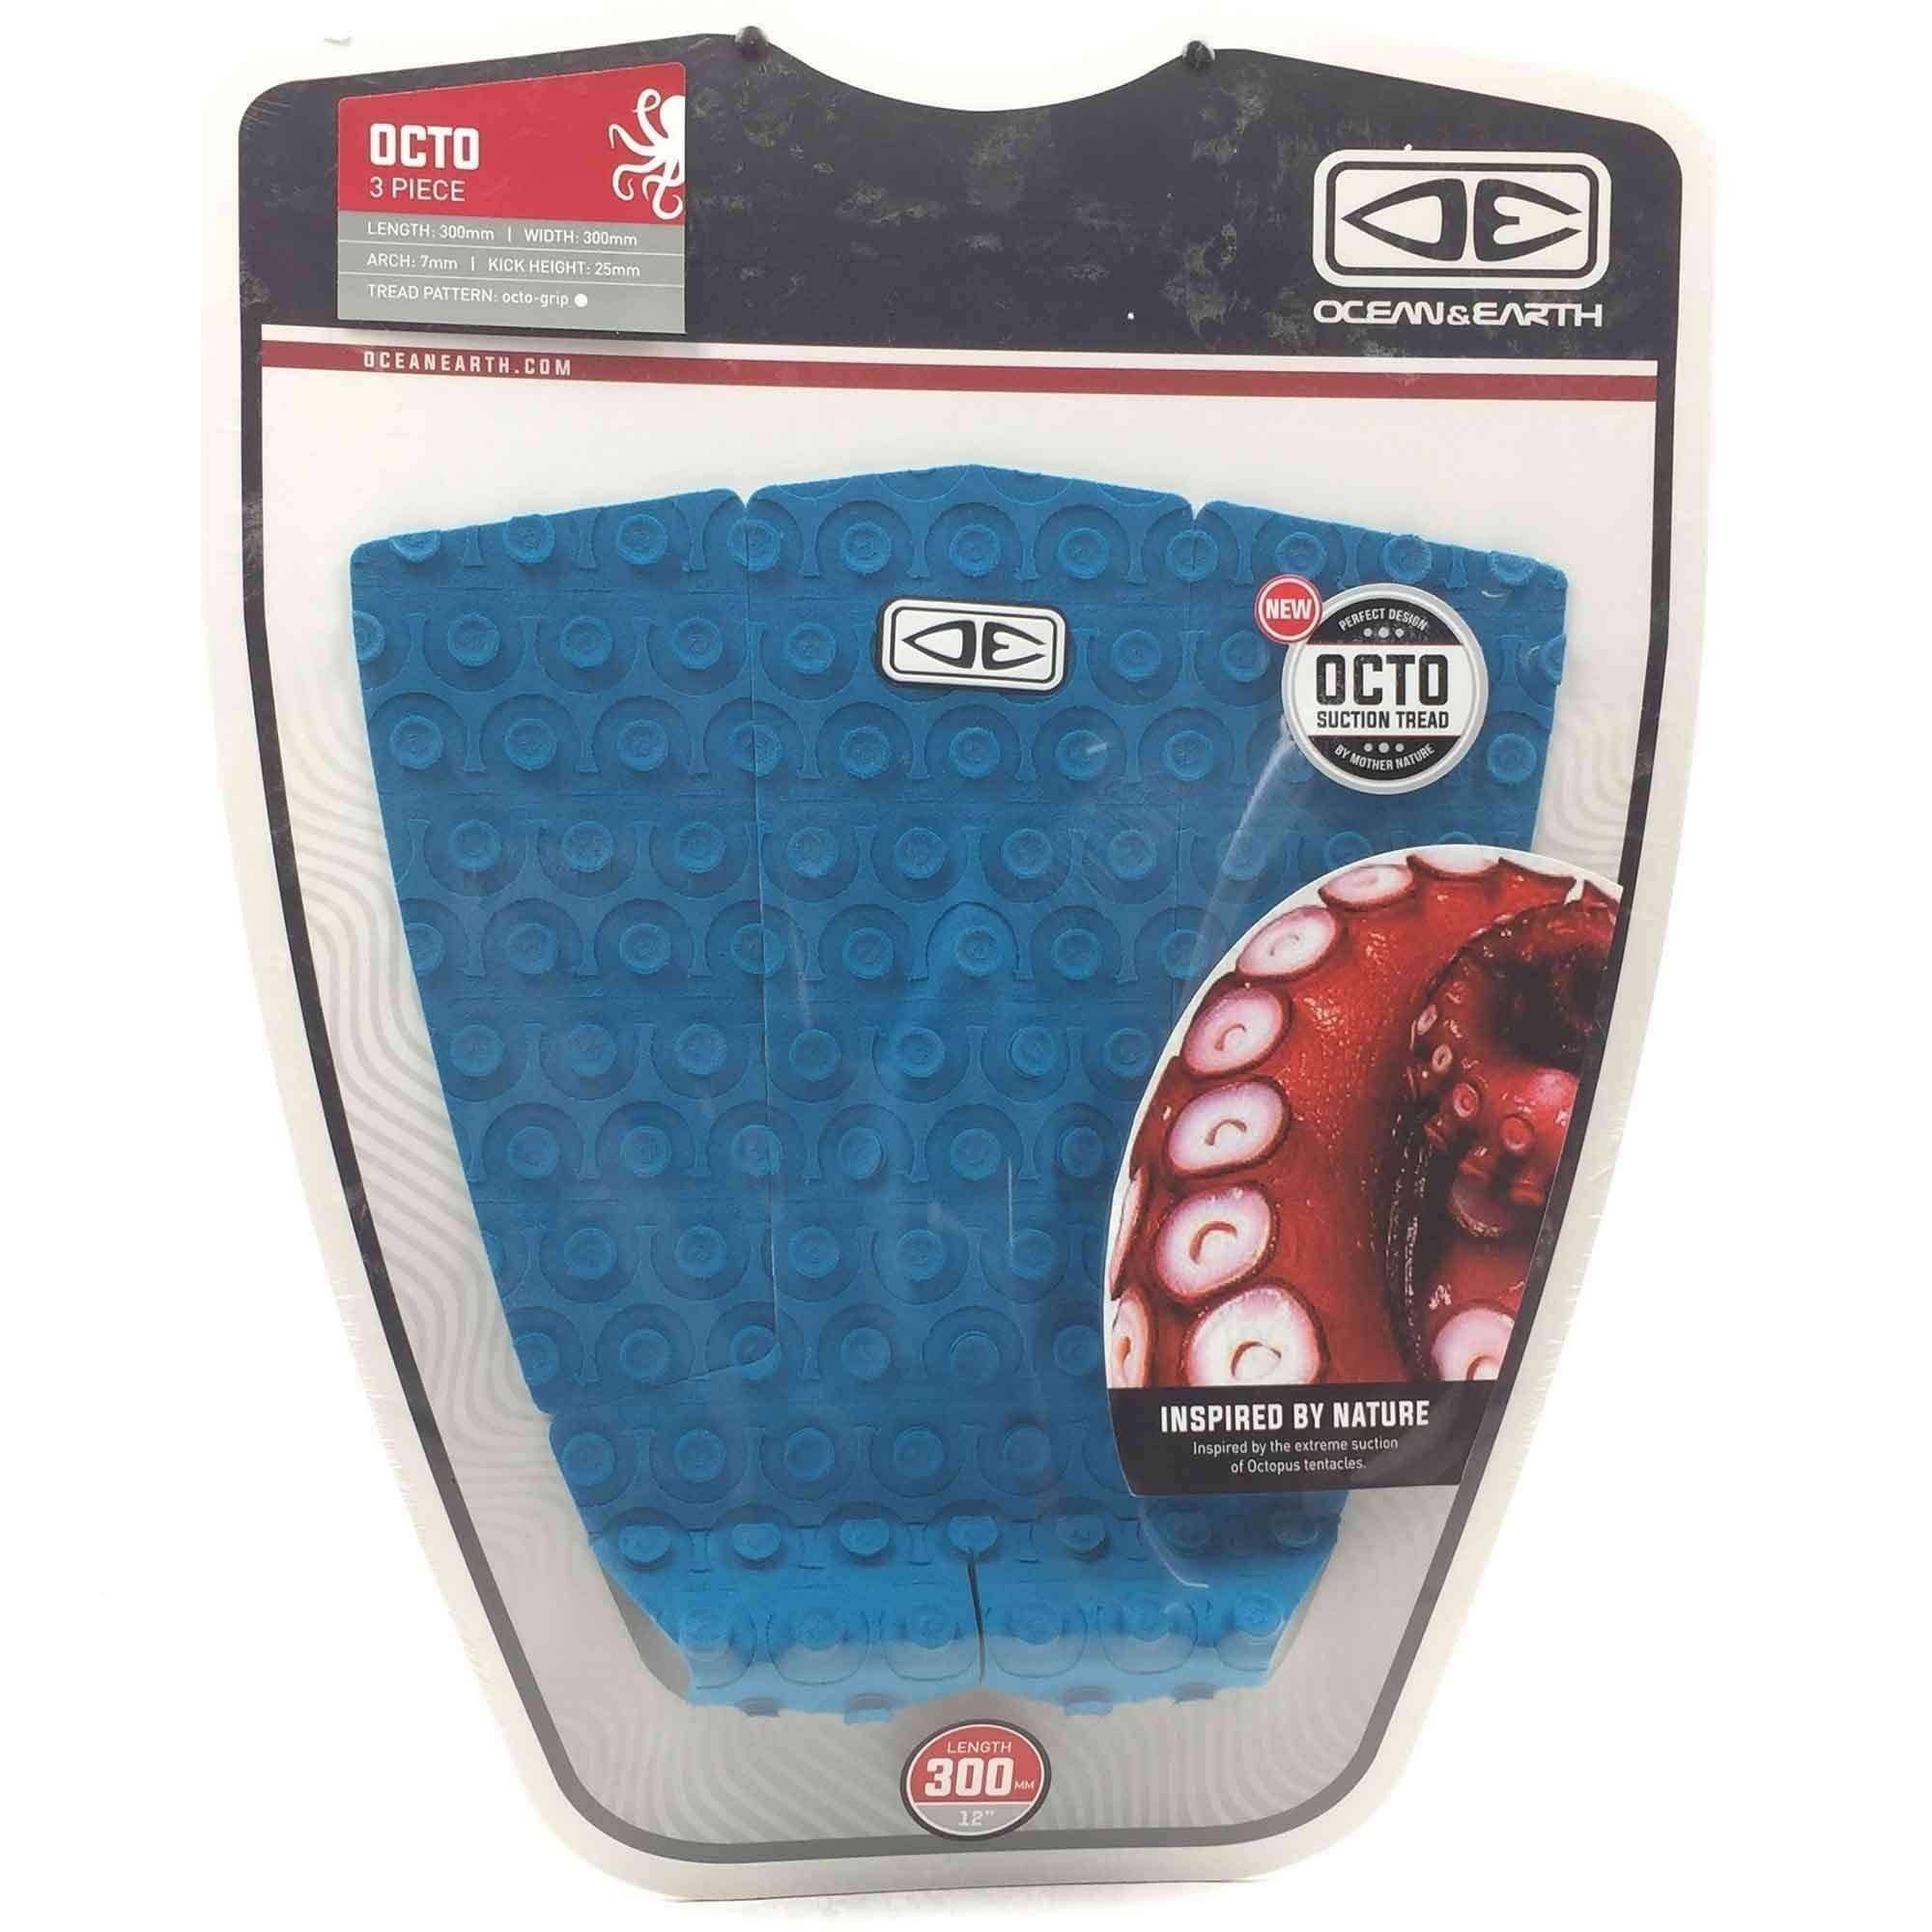 Ocean & Earth Octo Surfboard Tail Pad in Aqua 3 Piece Tail Pad by Ocean and Earth